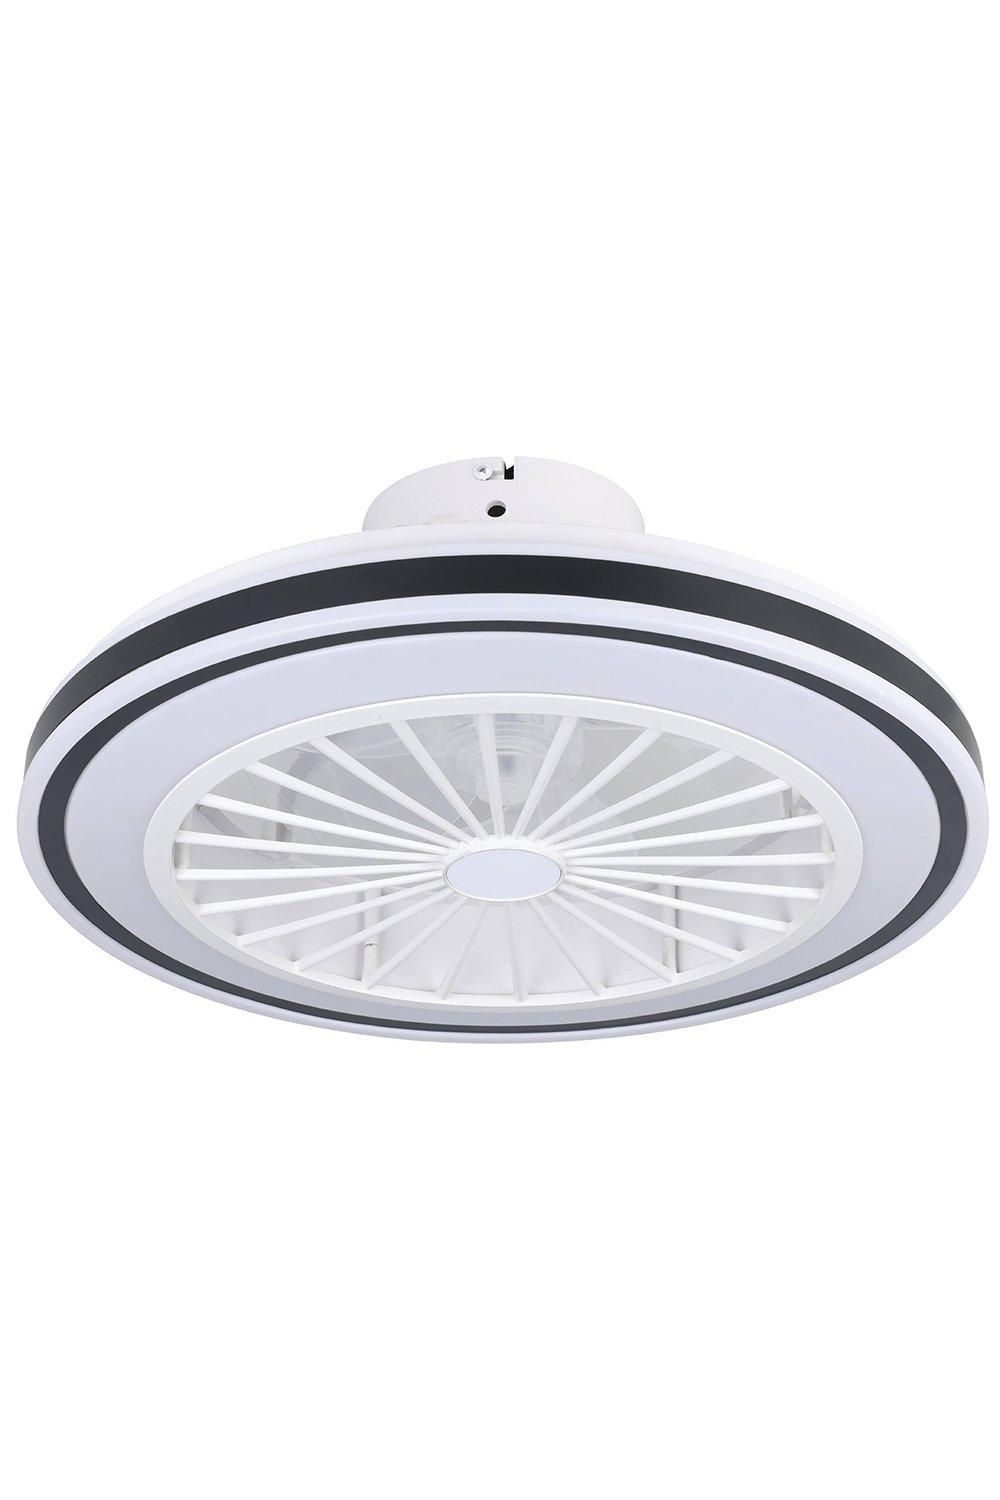 Almeria Compact White Ceiling Fan With Integrated LEDs